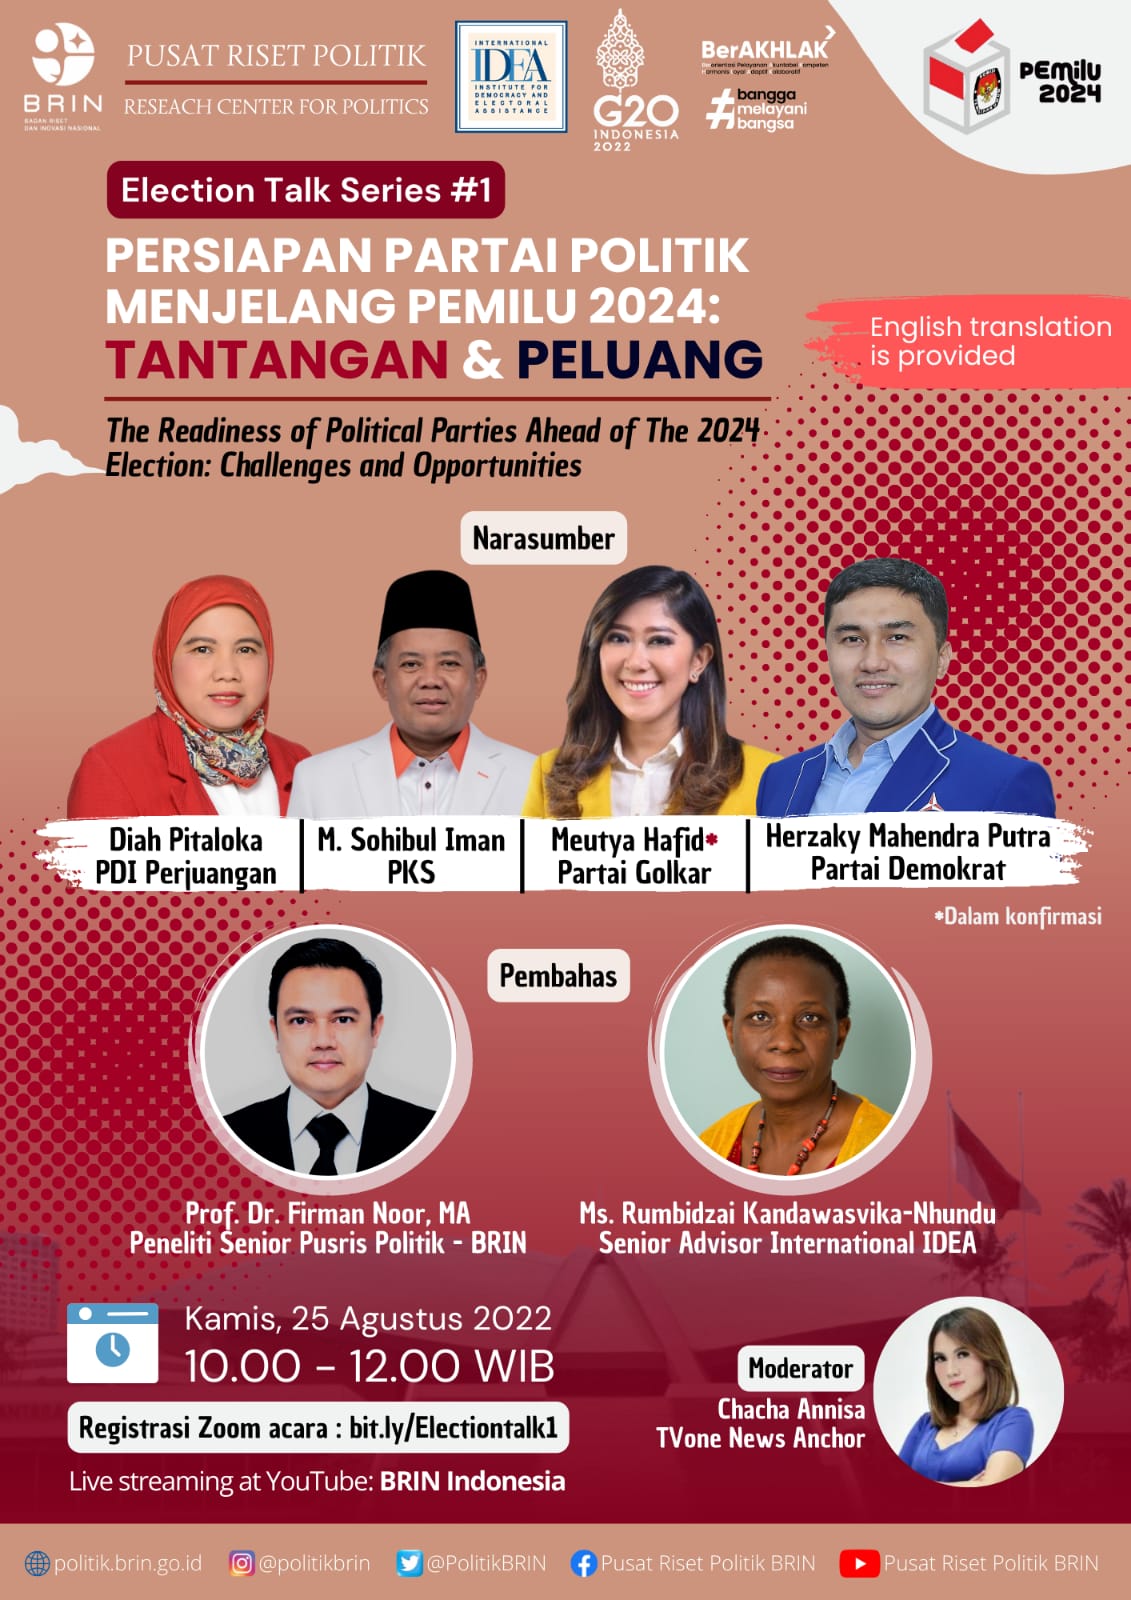 Election Talk 1 panel) The Readiness of Indonesian Political